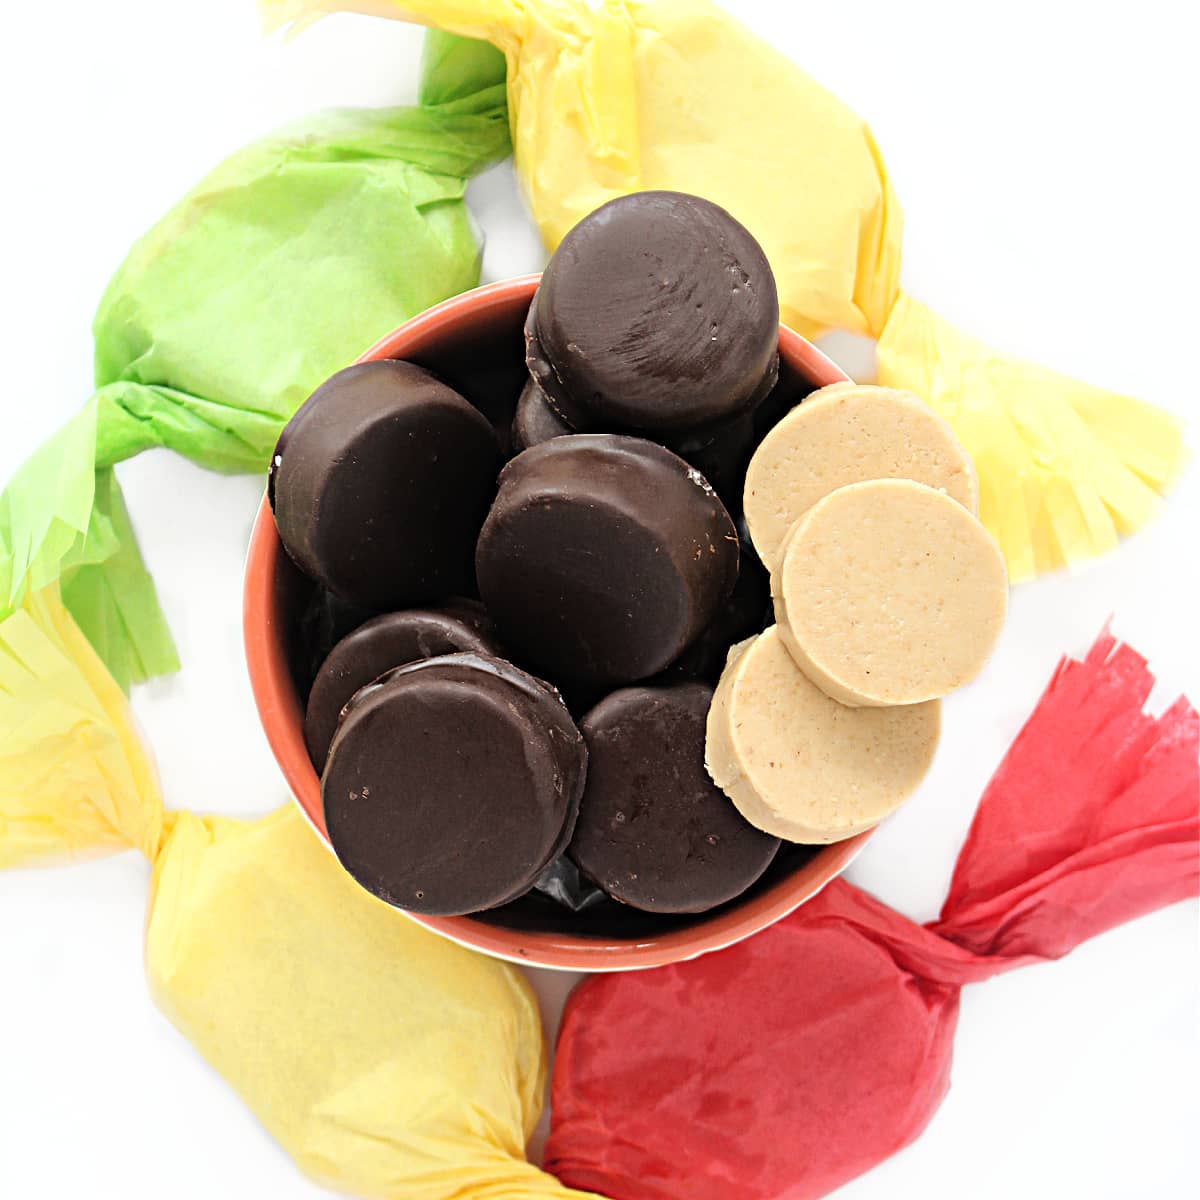 Bite sized, chocolate coated mazapan candy discs in a bowl surrounded by tissue paper wrapped candies.